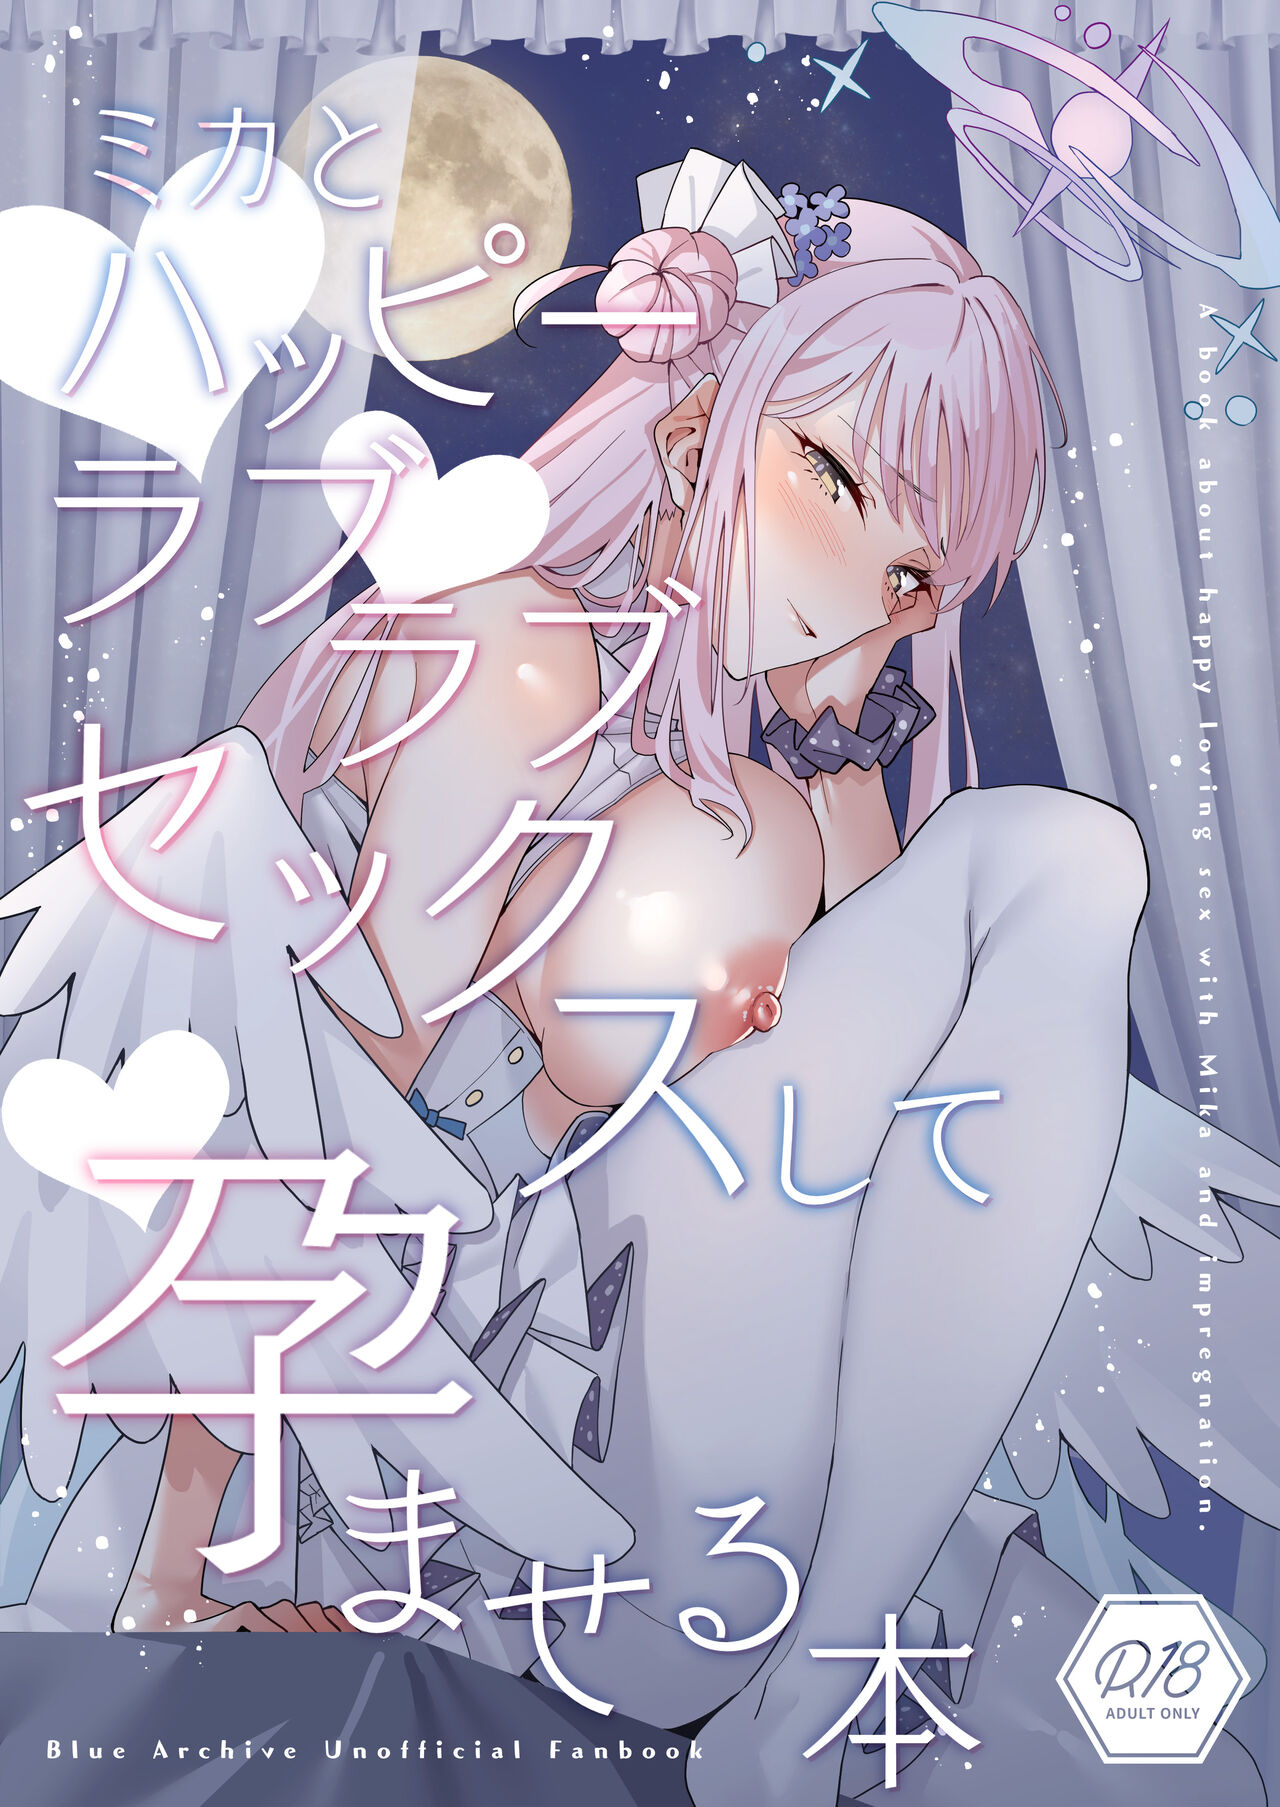 Mika to Happy Love Love Sex Shite Haramaseru Hon – A book about happy loving sex with Mika and impregnation. | Lovey Dovey Impregnation Sex With Mika!